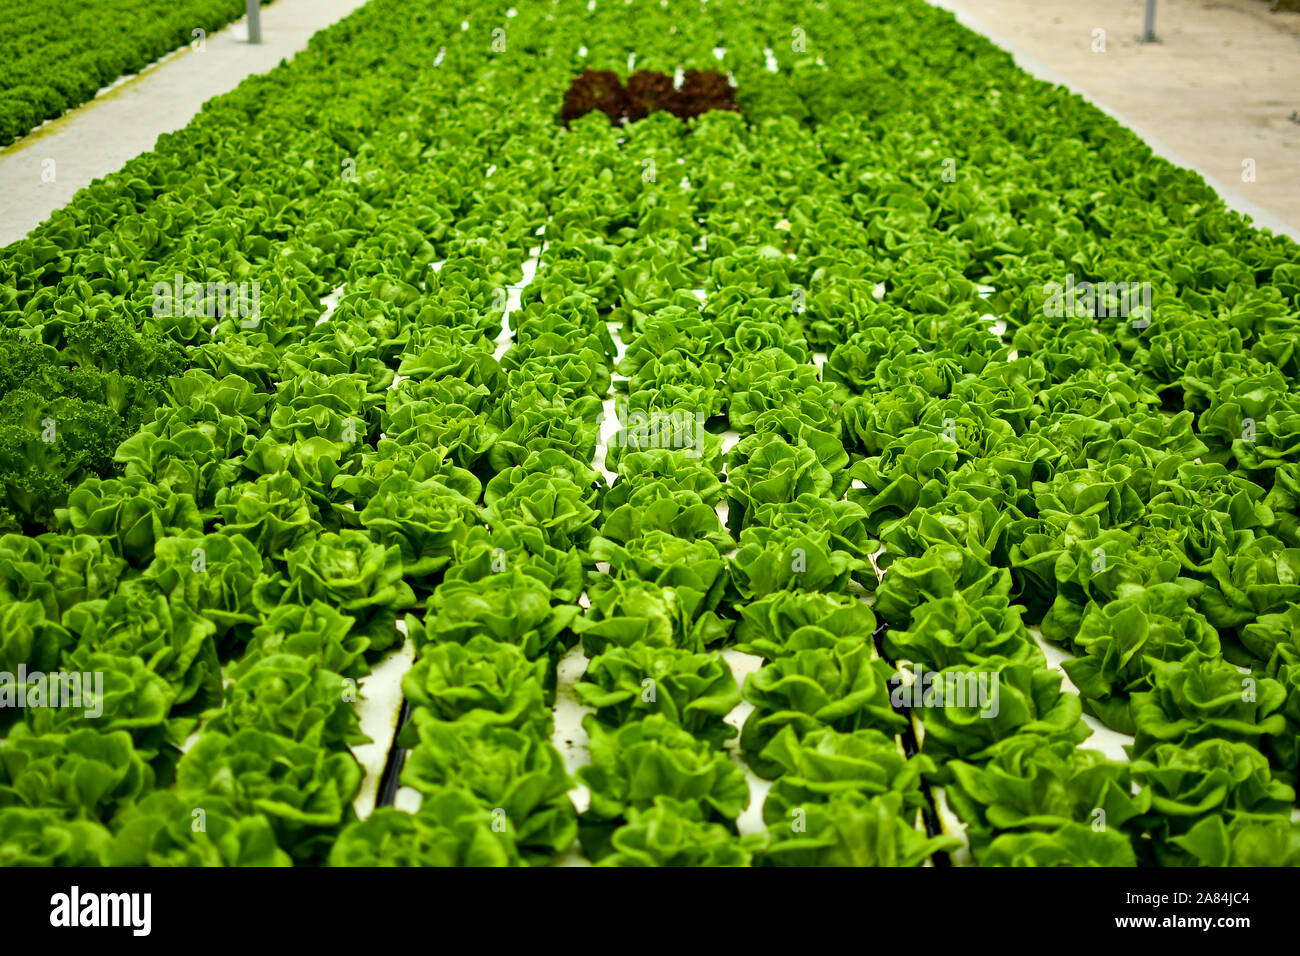 Hydroponics floating planting system farming with group of vegetables. Stock Photo